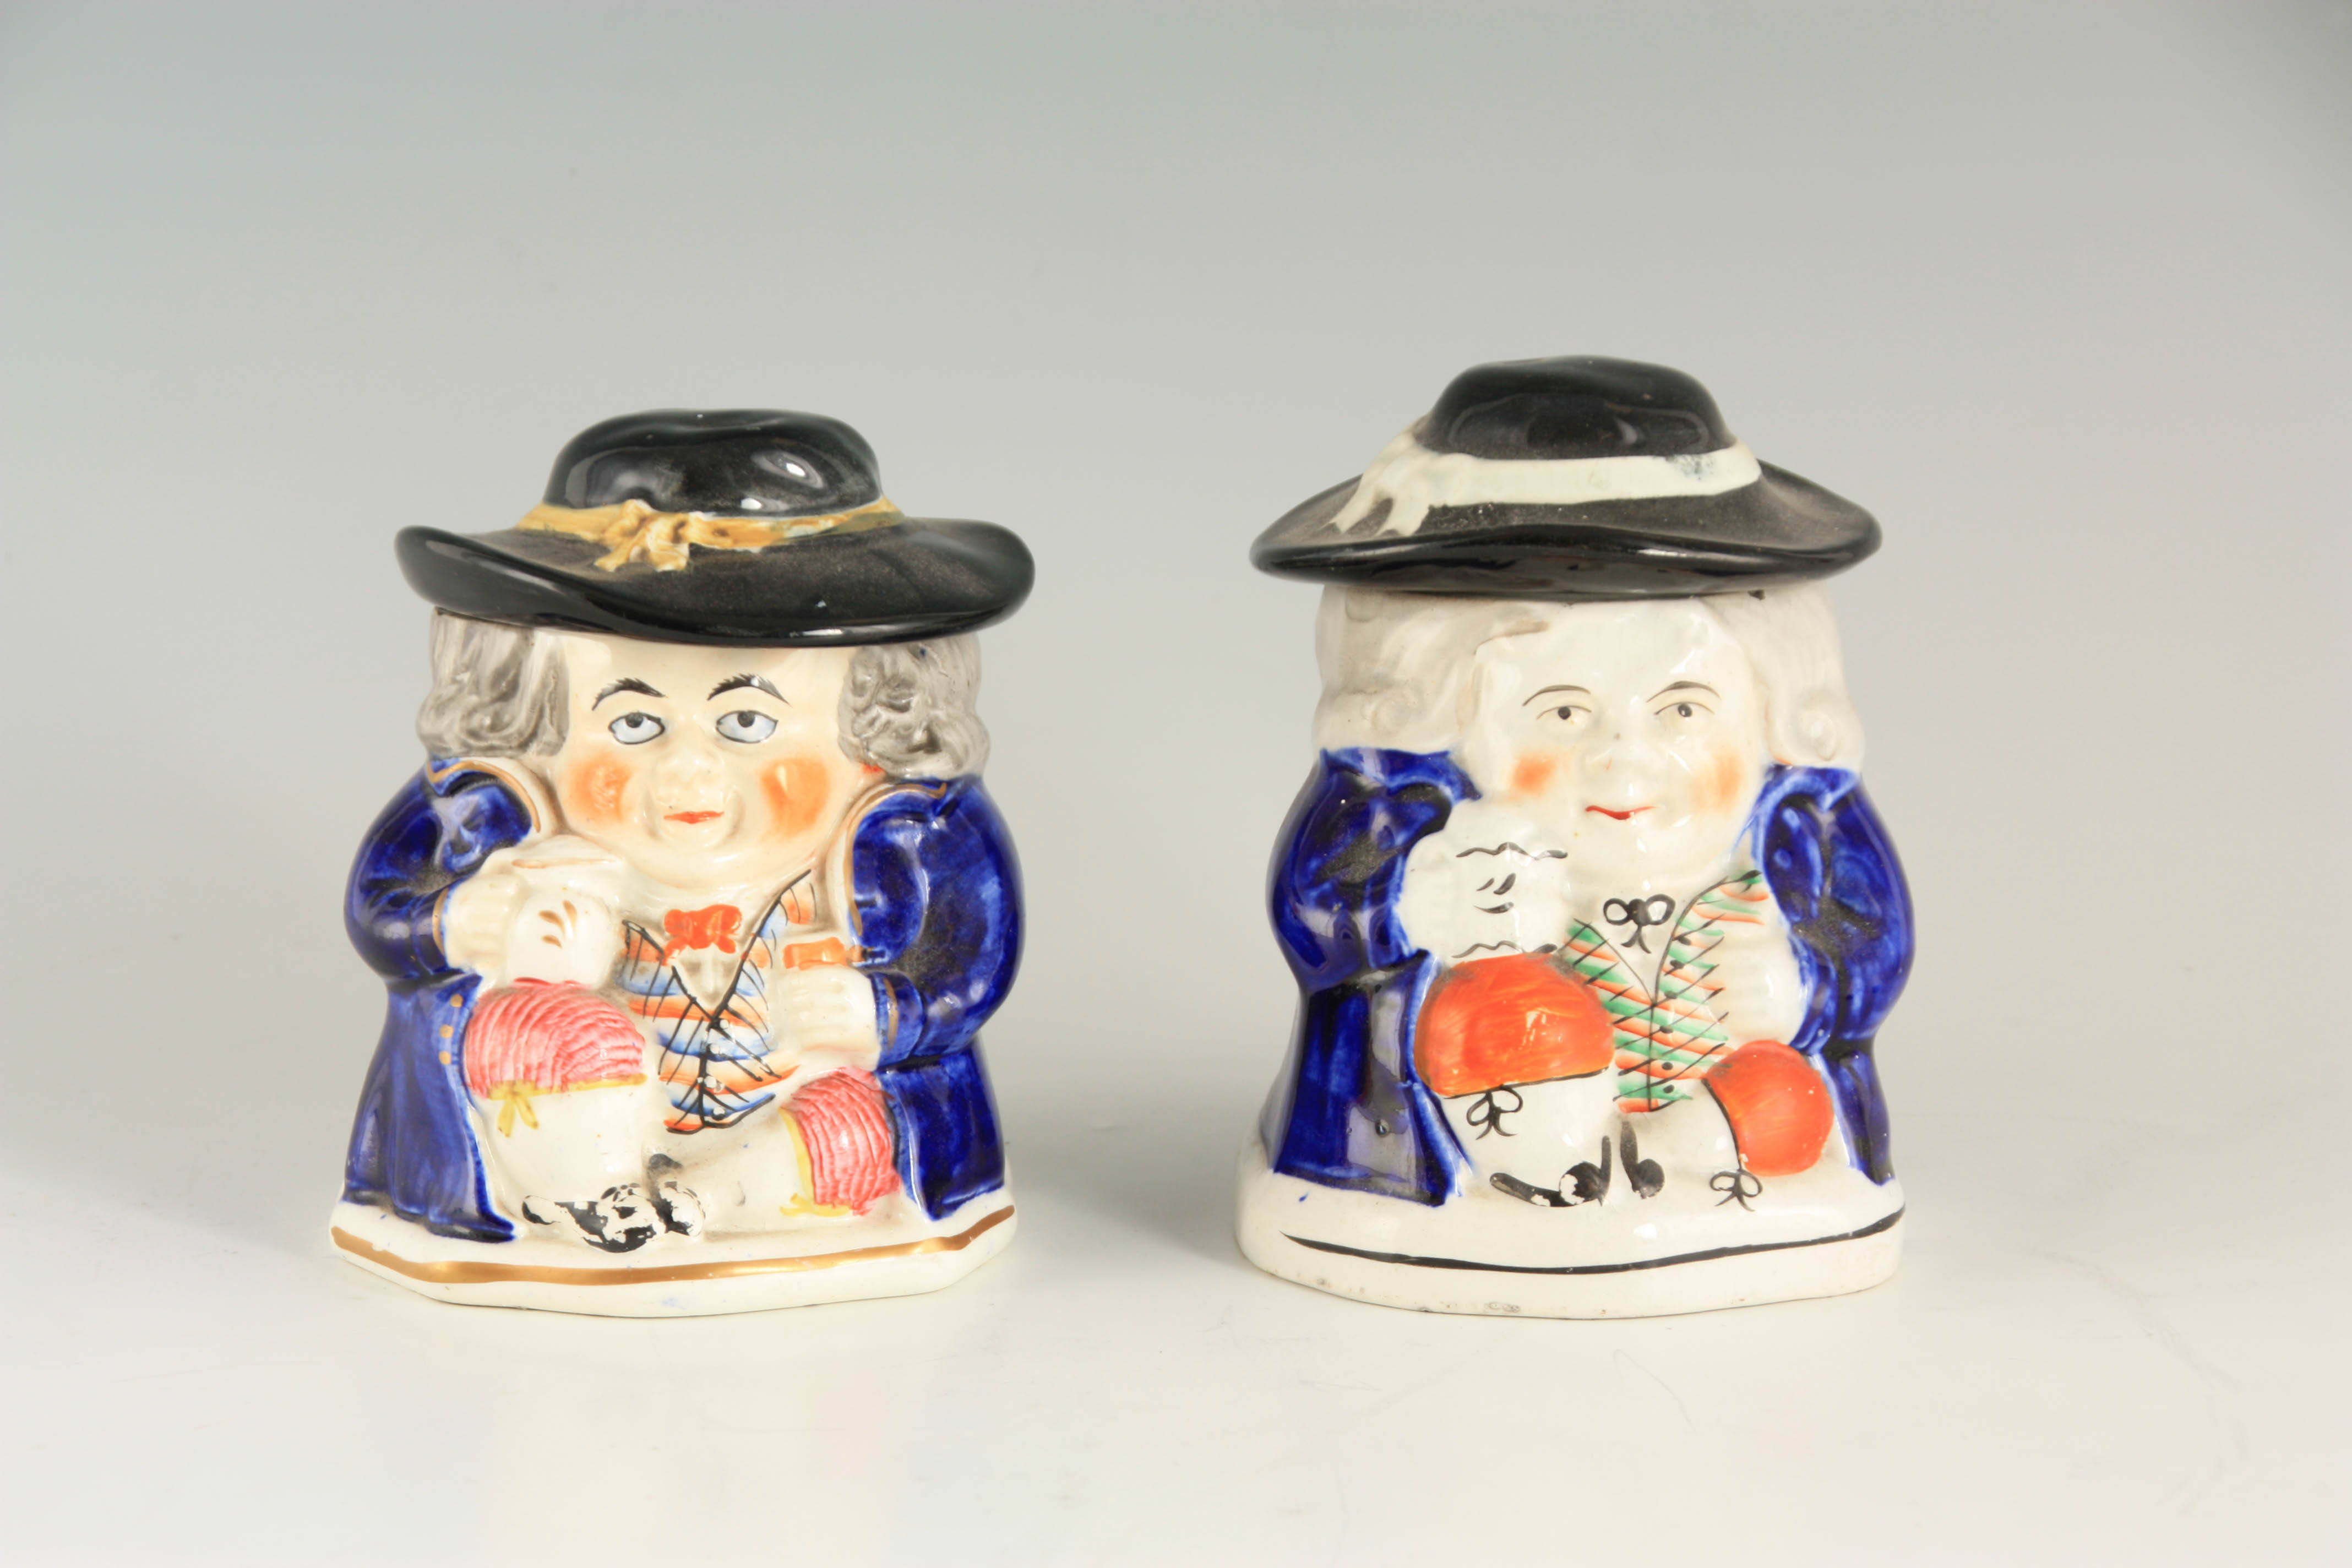 A PAIR OF COLOURFUL SEATED TOBY FIGURE LIDDED JARS 12.5cm high - Image 2 of 4